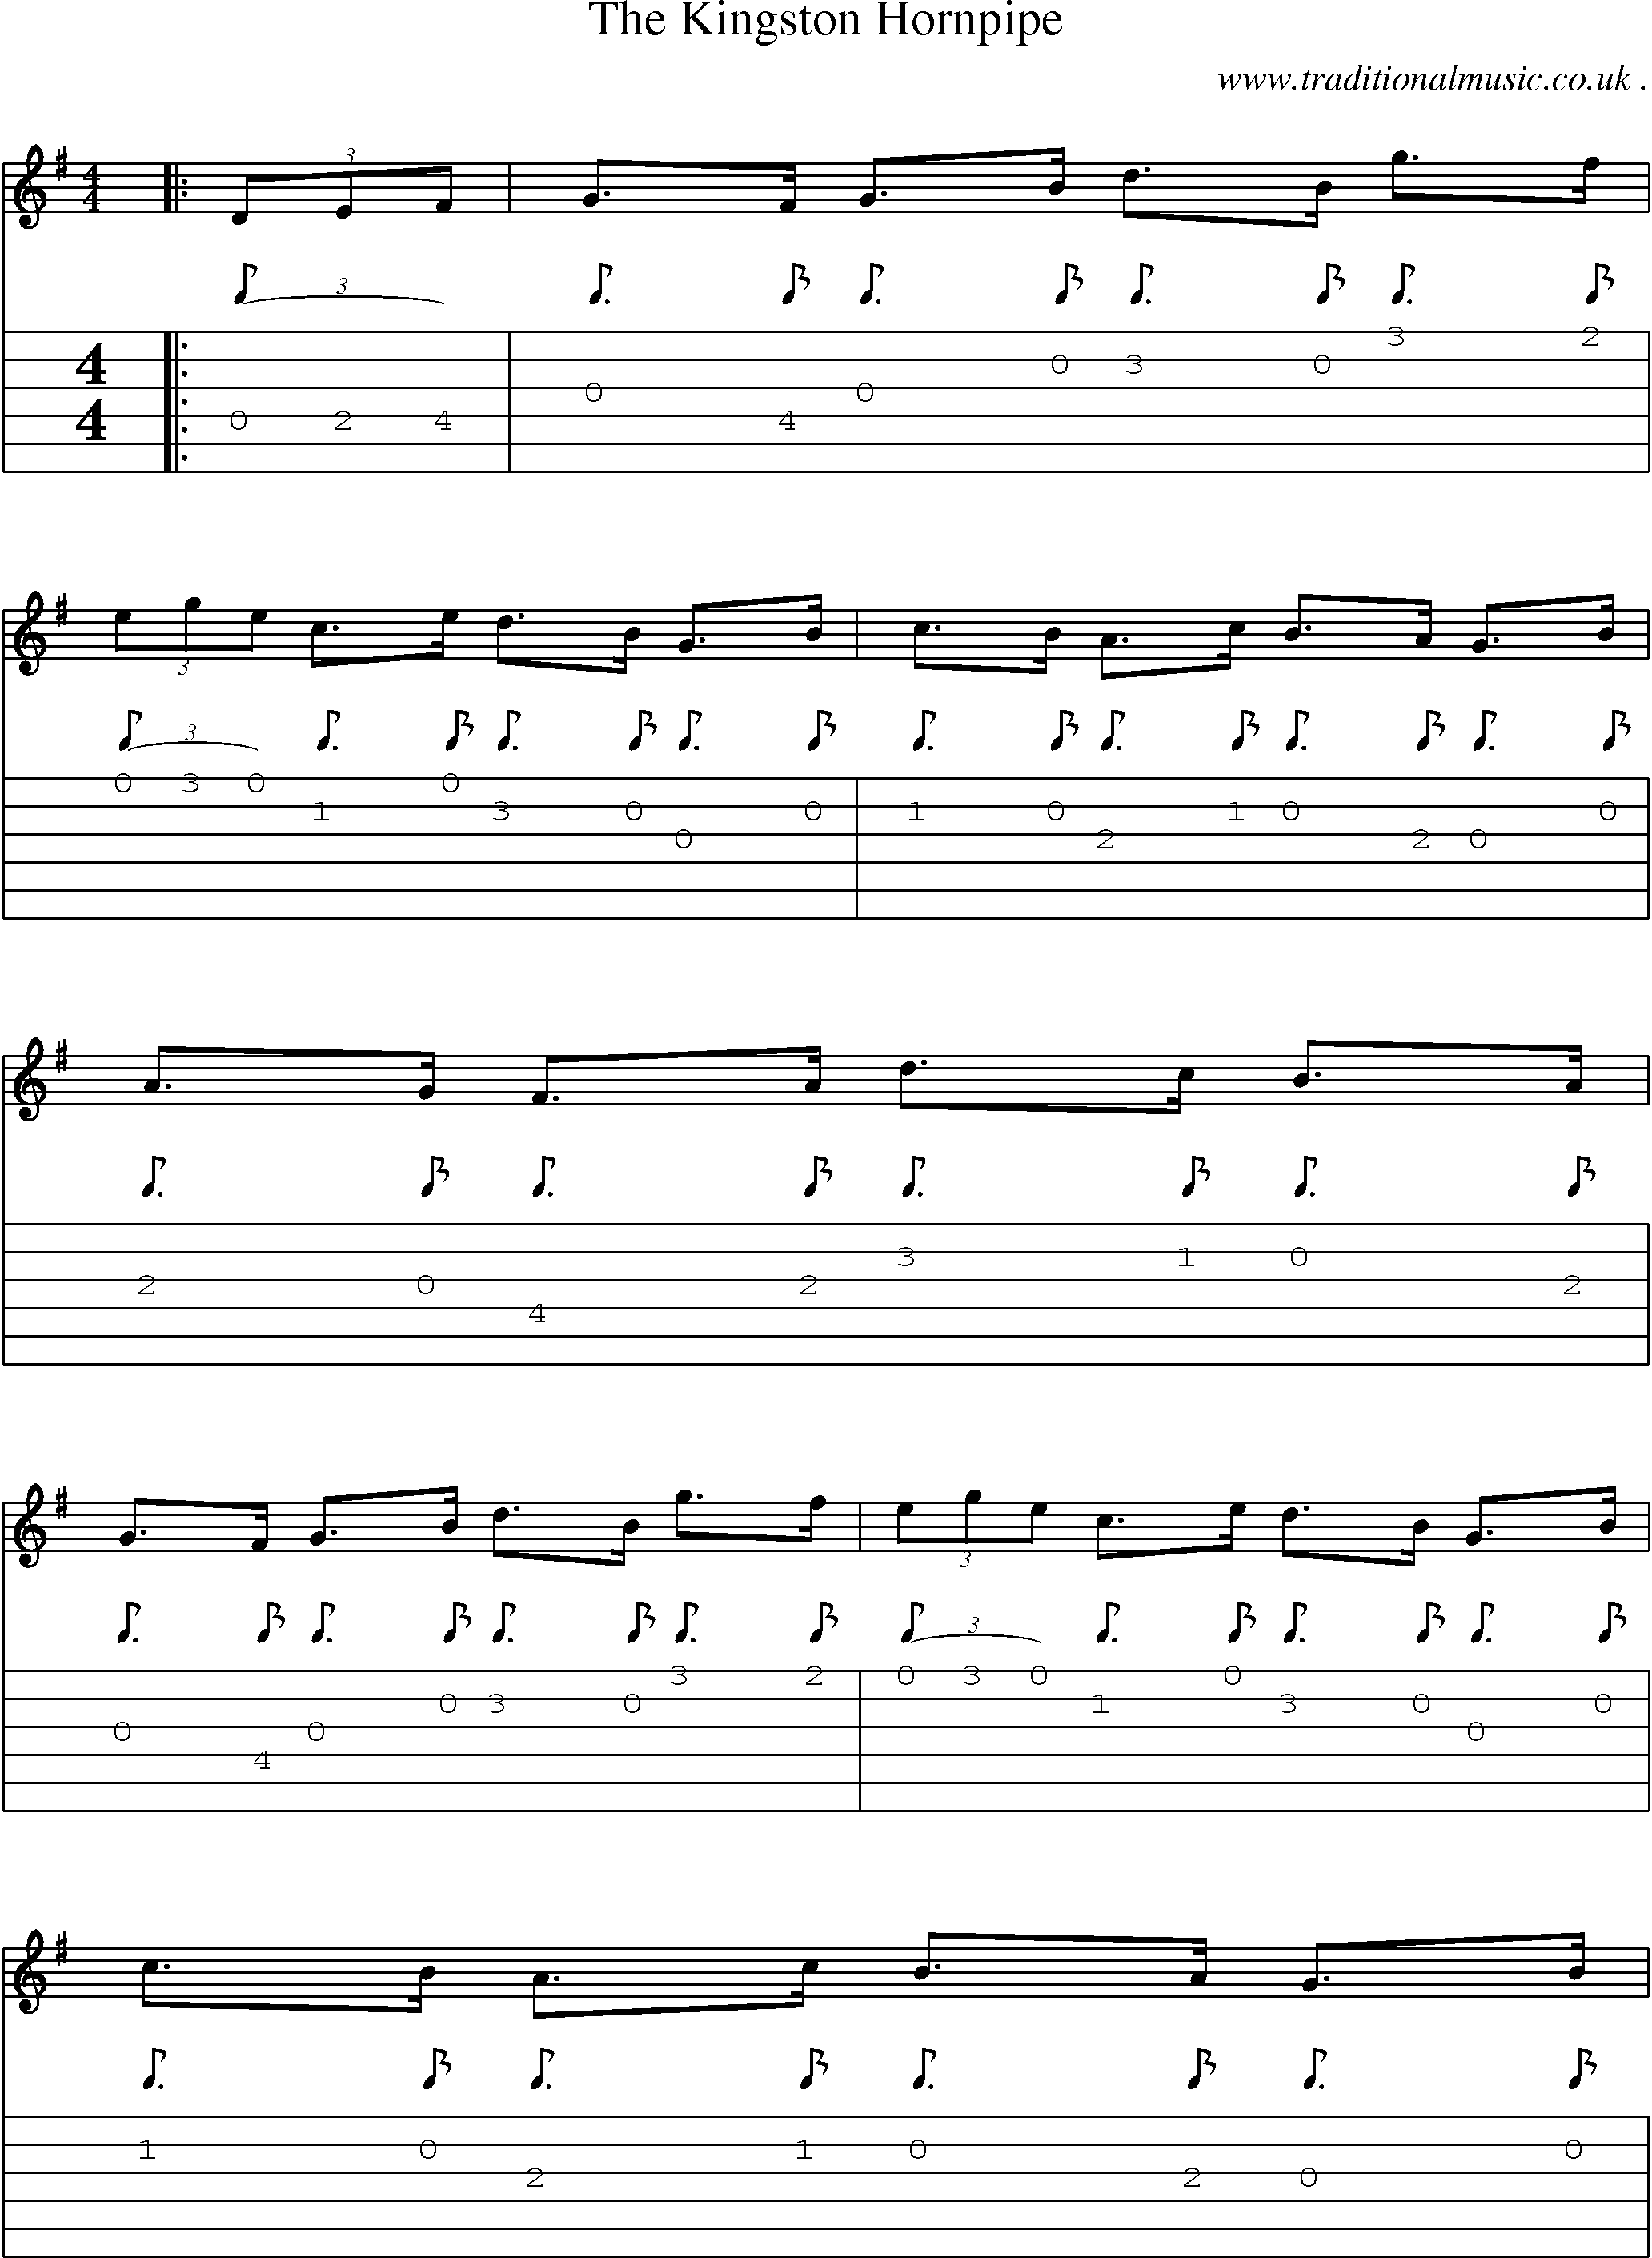 Sheet-Music and Guitar Tabs for The Kingston Hornpipe